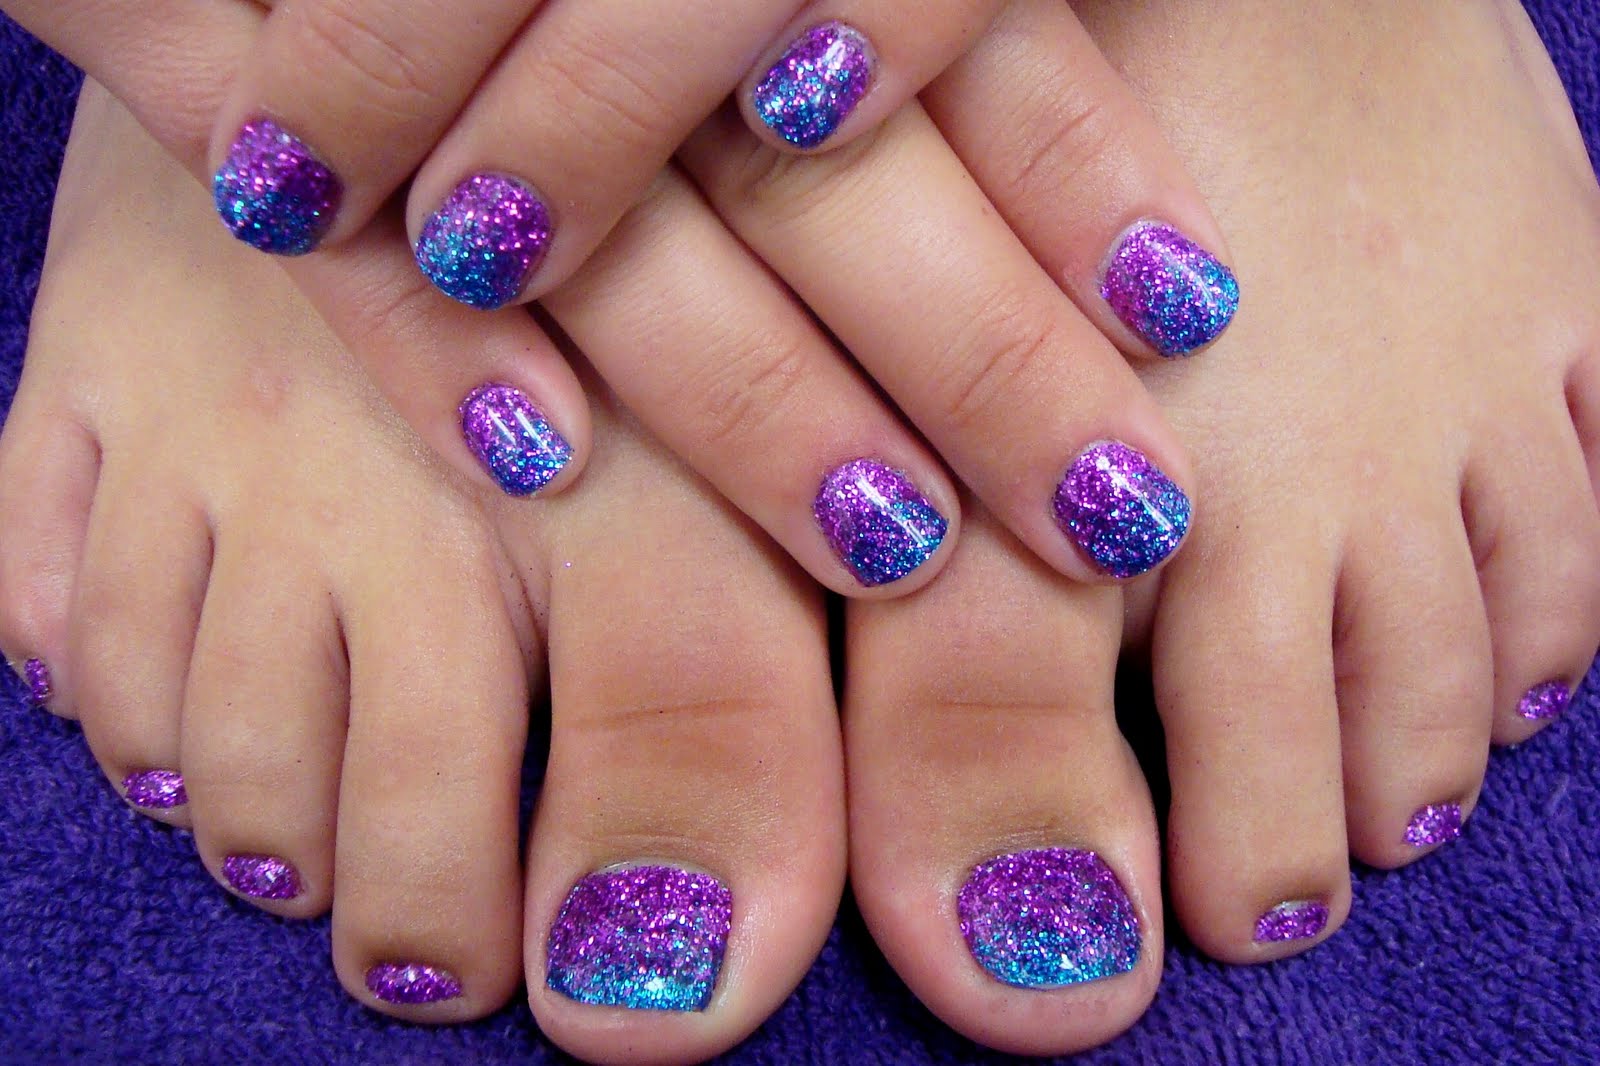 9. Smoky Nail Art with Glitter - wide 6